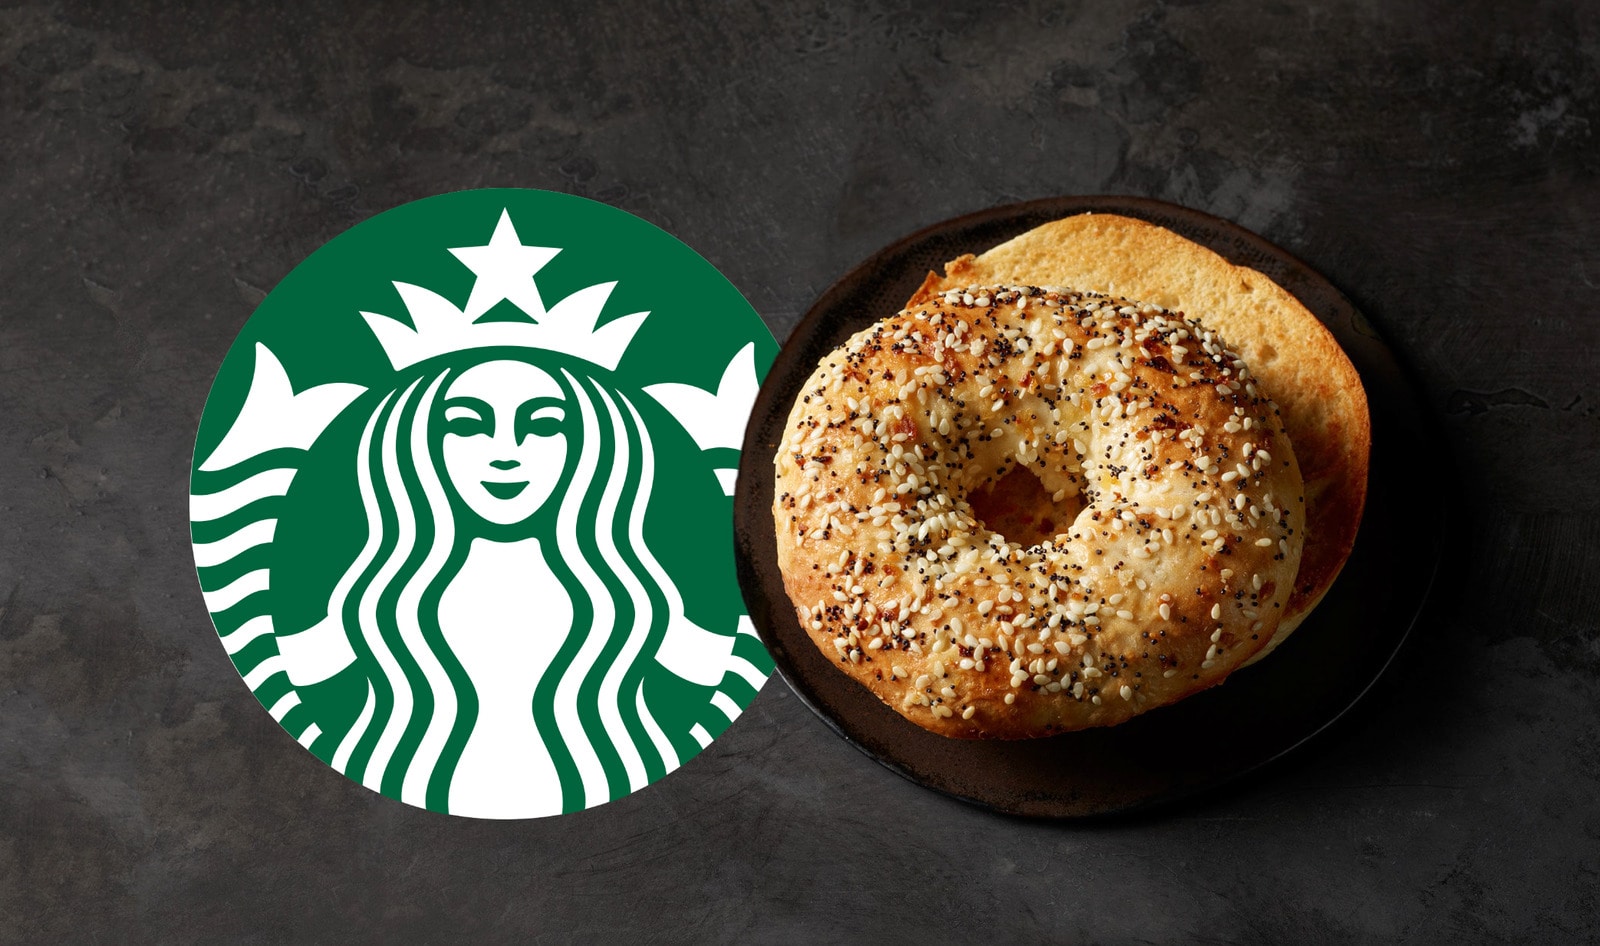 Starbucks CEO Pledges to Add More Plant-Based Food Options, Looking Into Vegan Meat for Breakfast&nbsp;